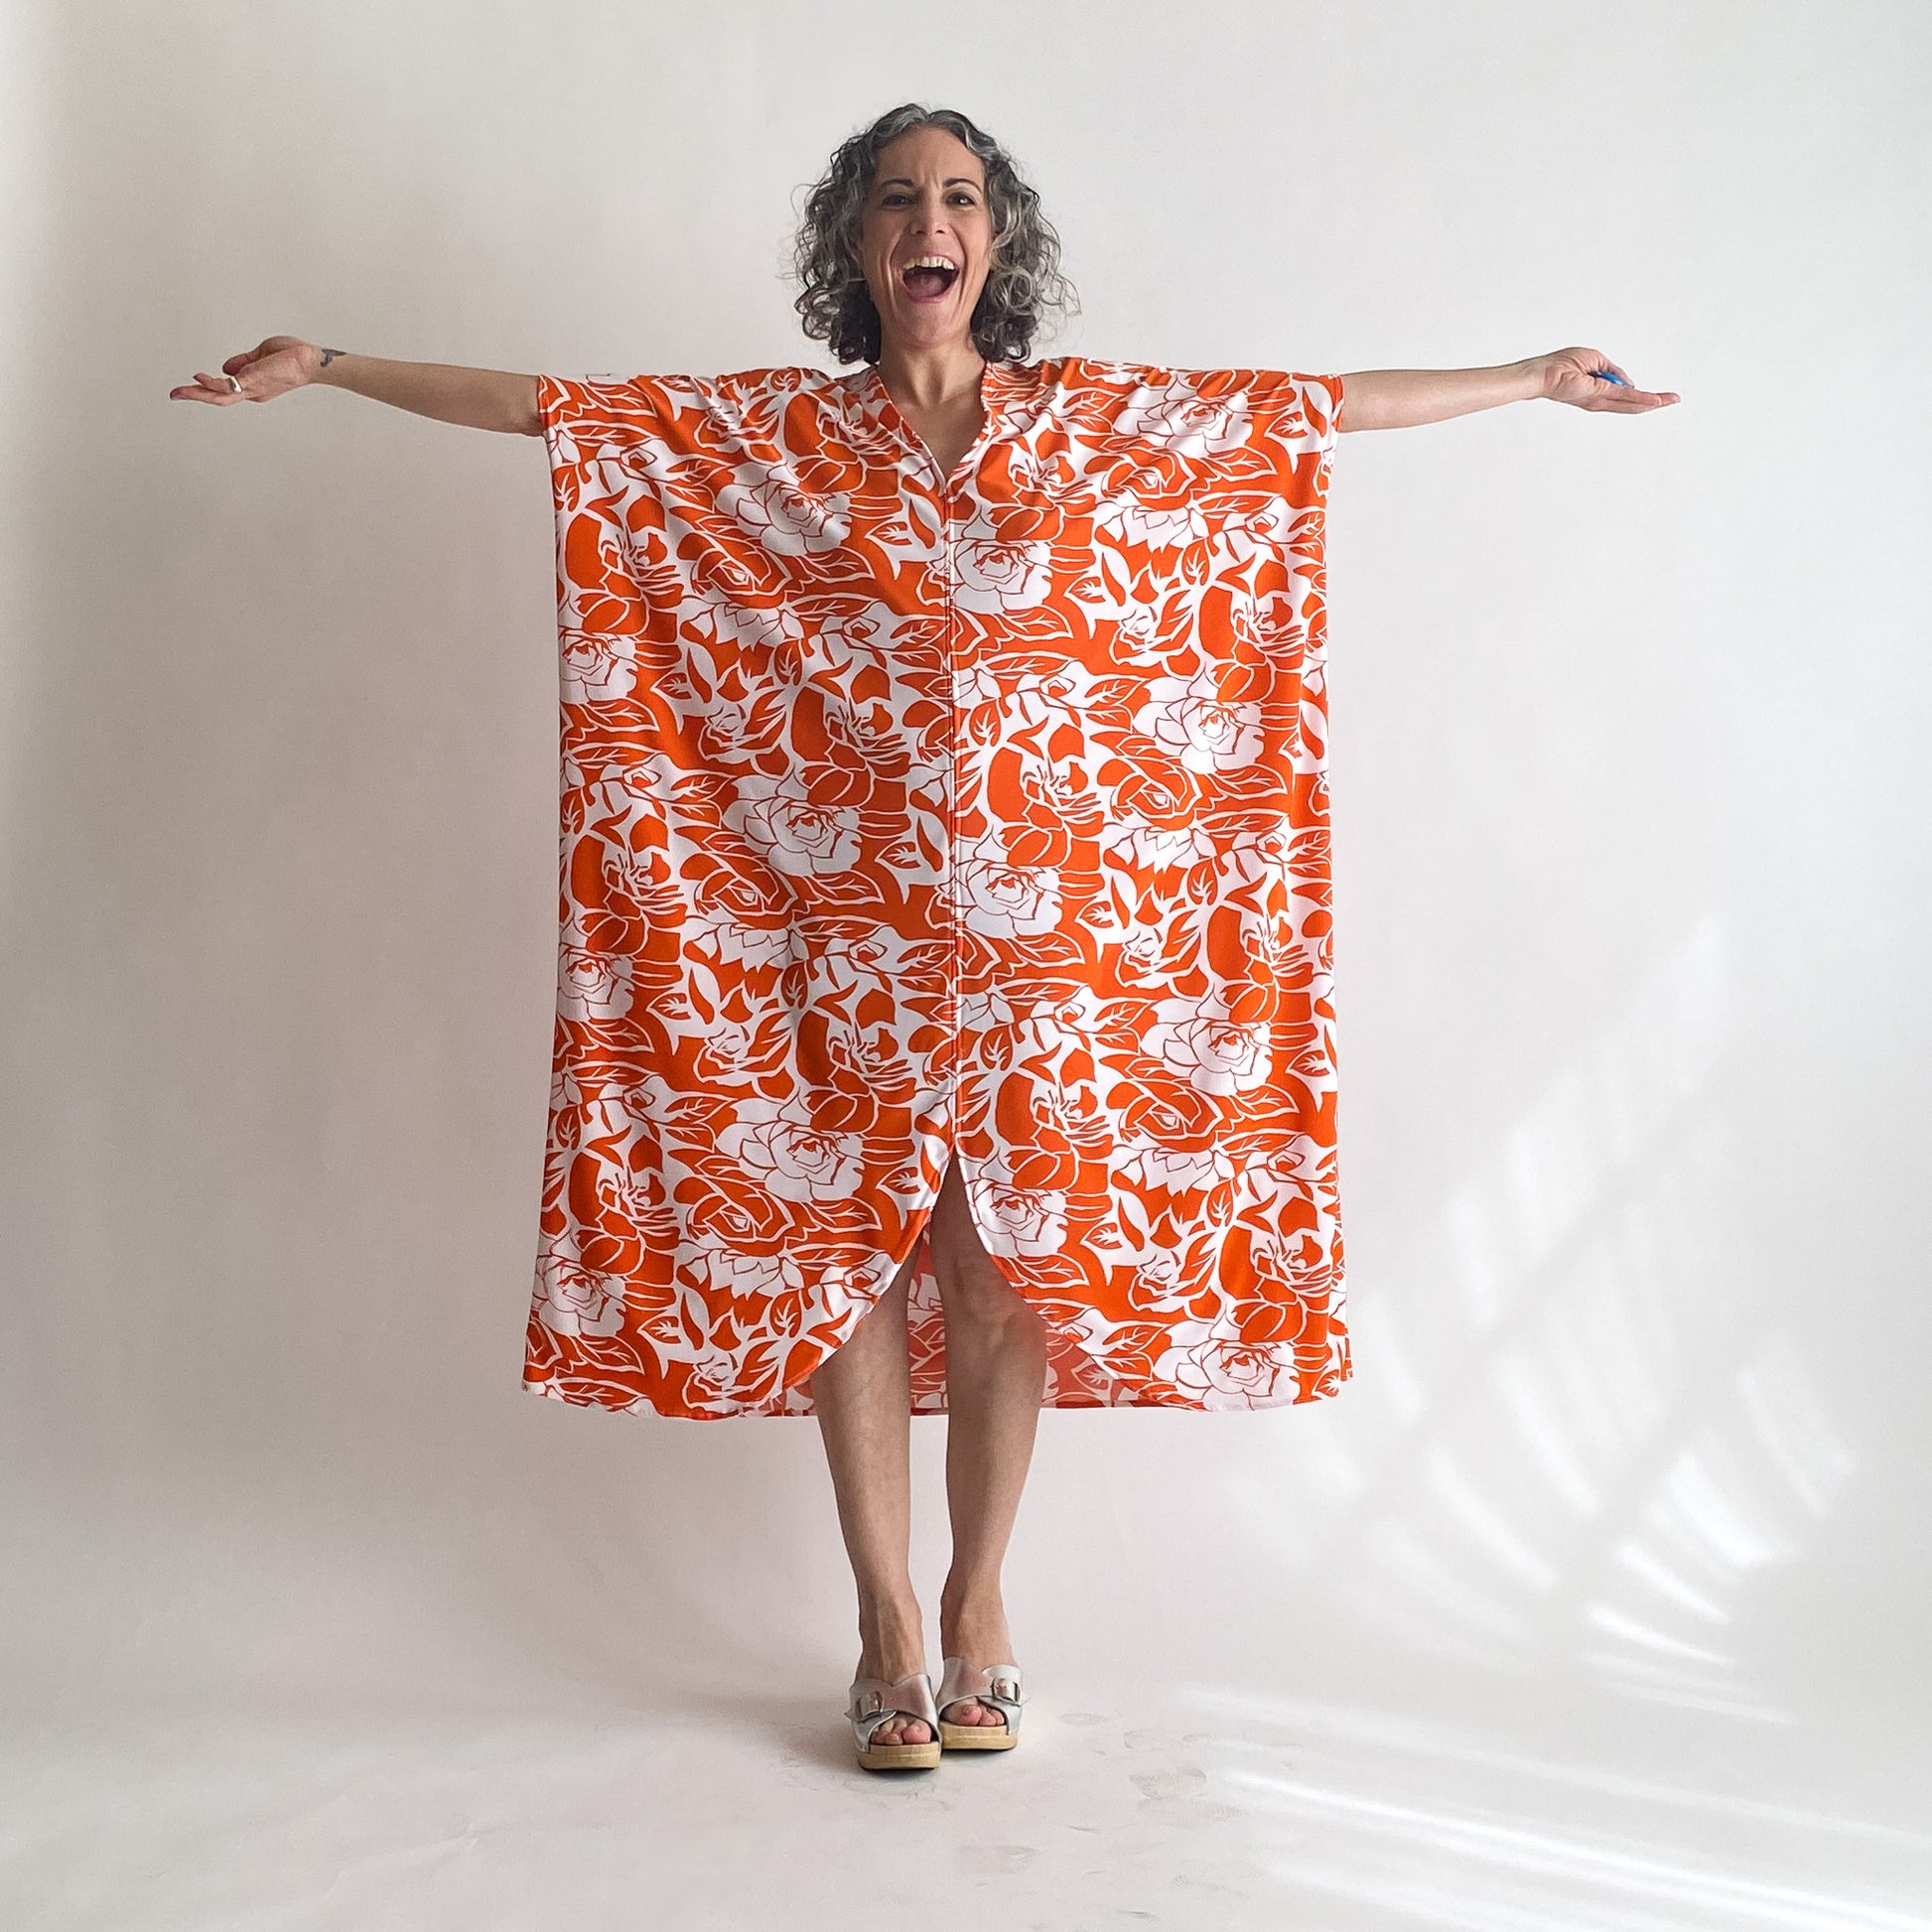 House of Lu Diana Caftan in Color Number 47. Orange and White vintage floral print in a vintage acetate fabric. Featured here in size Petite.